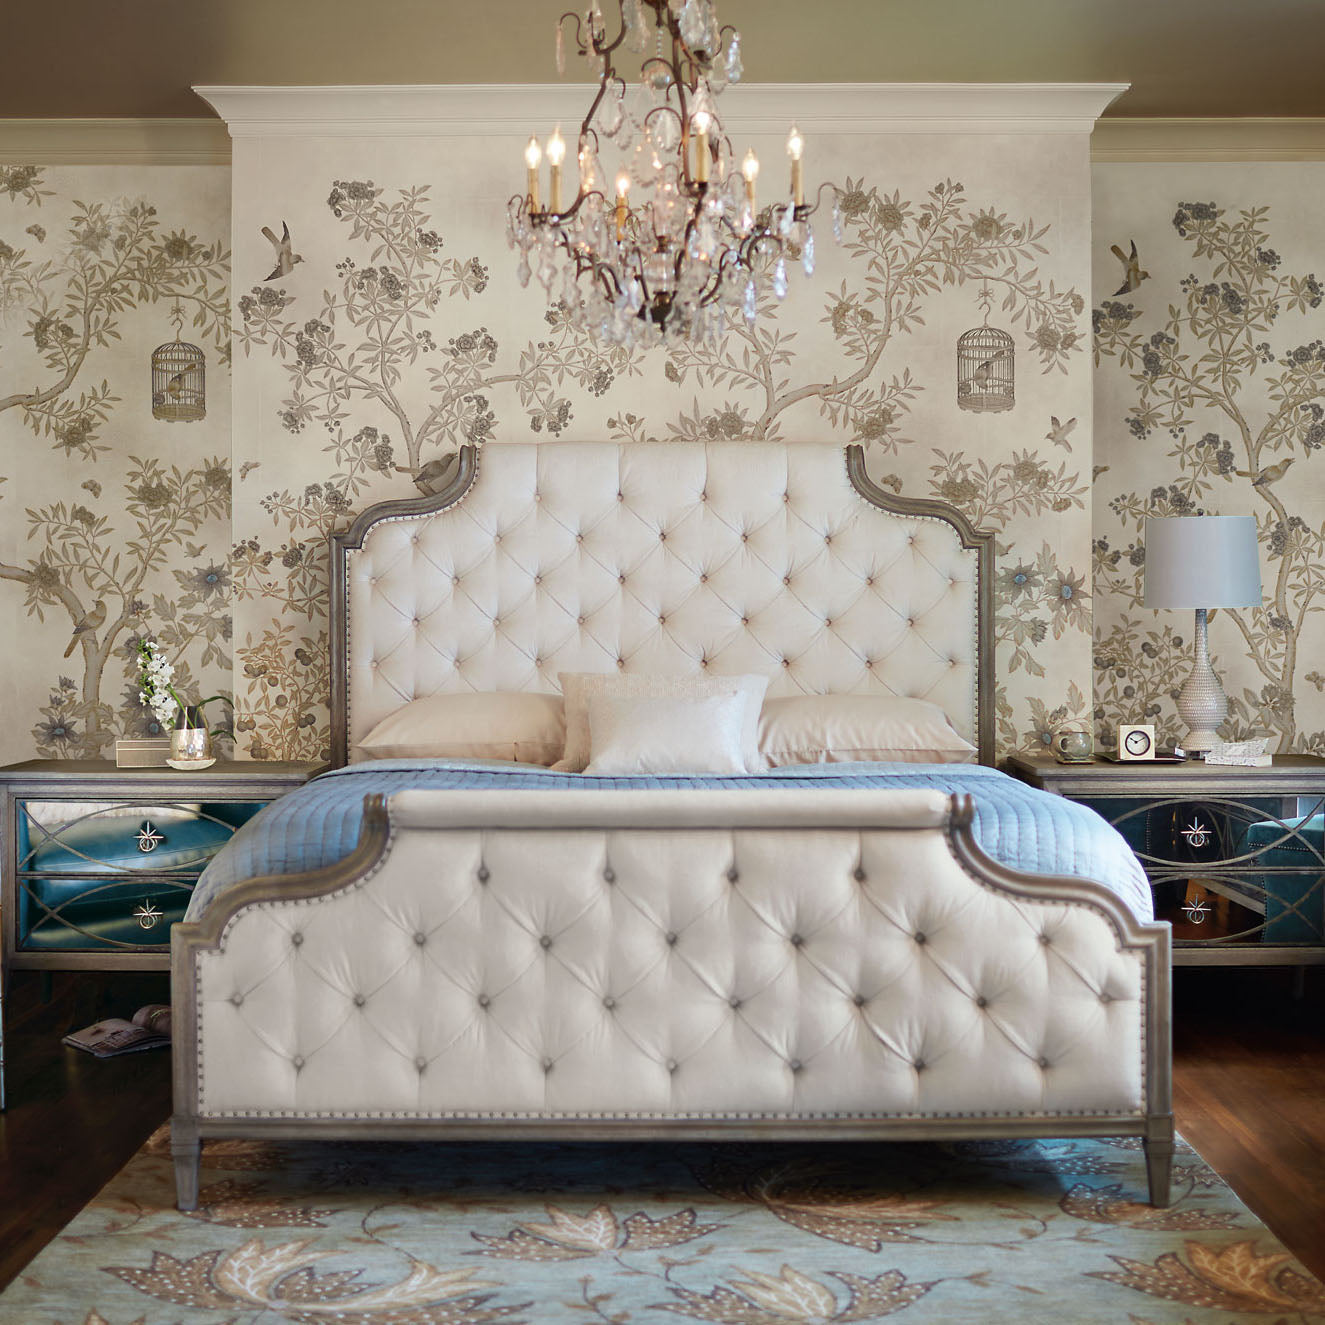 Marquesa Upholstered Bed